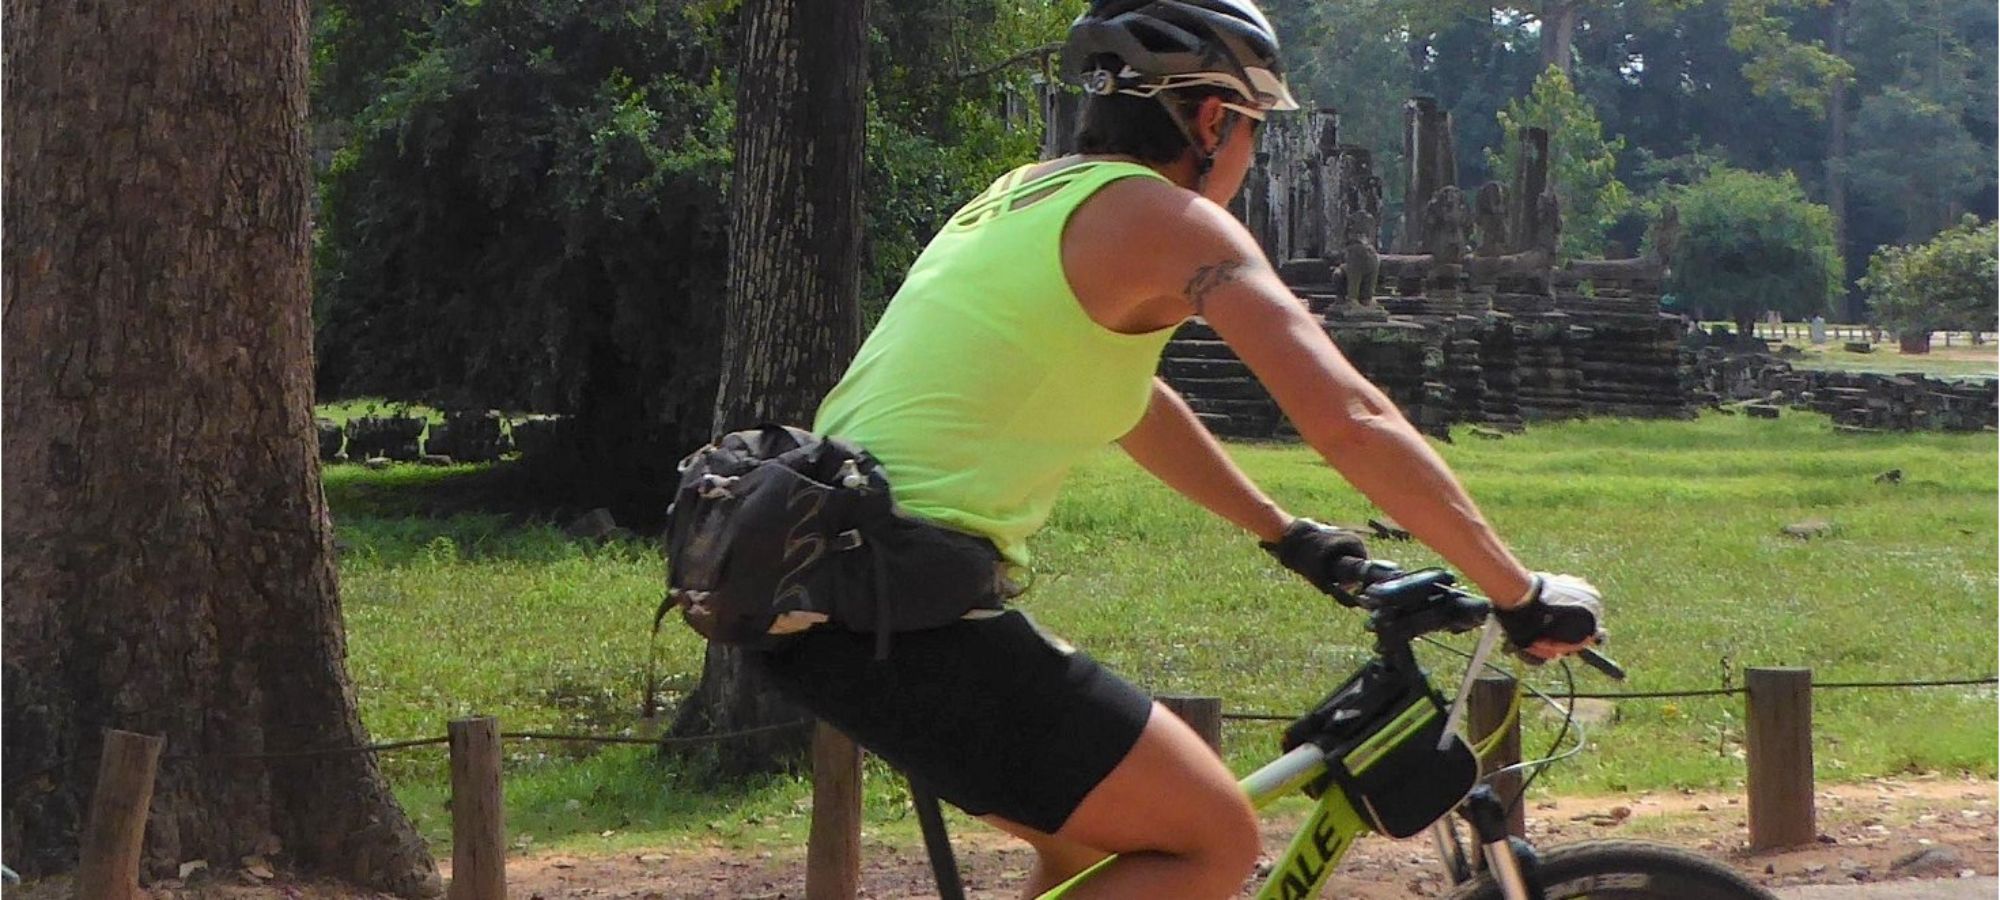 Photos from our Cambodia Cycling Holiday